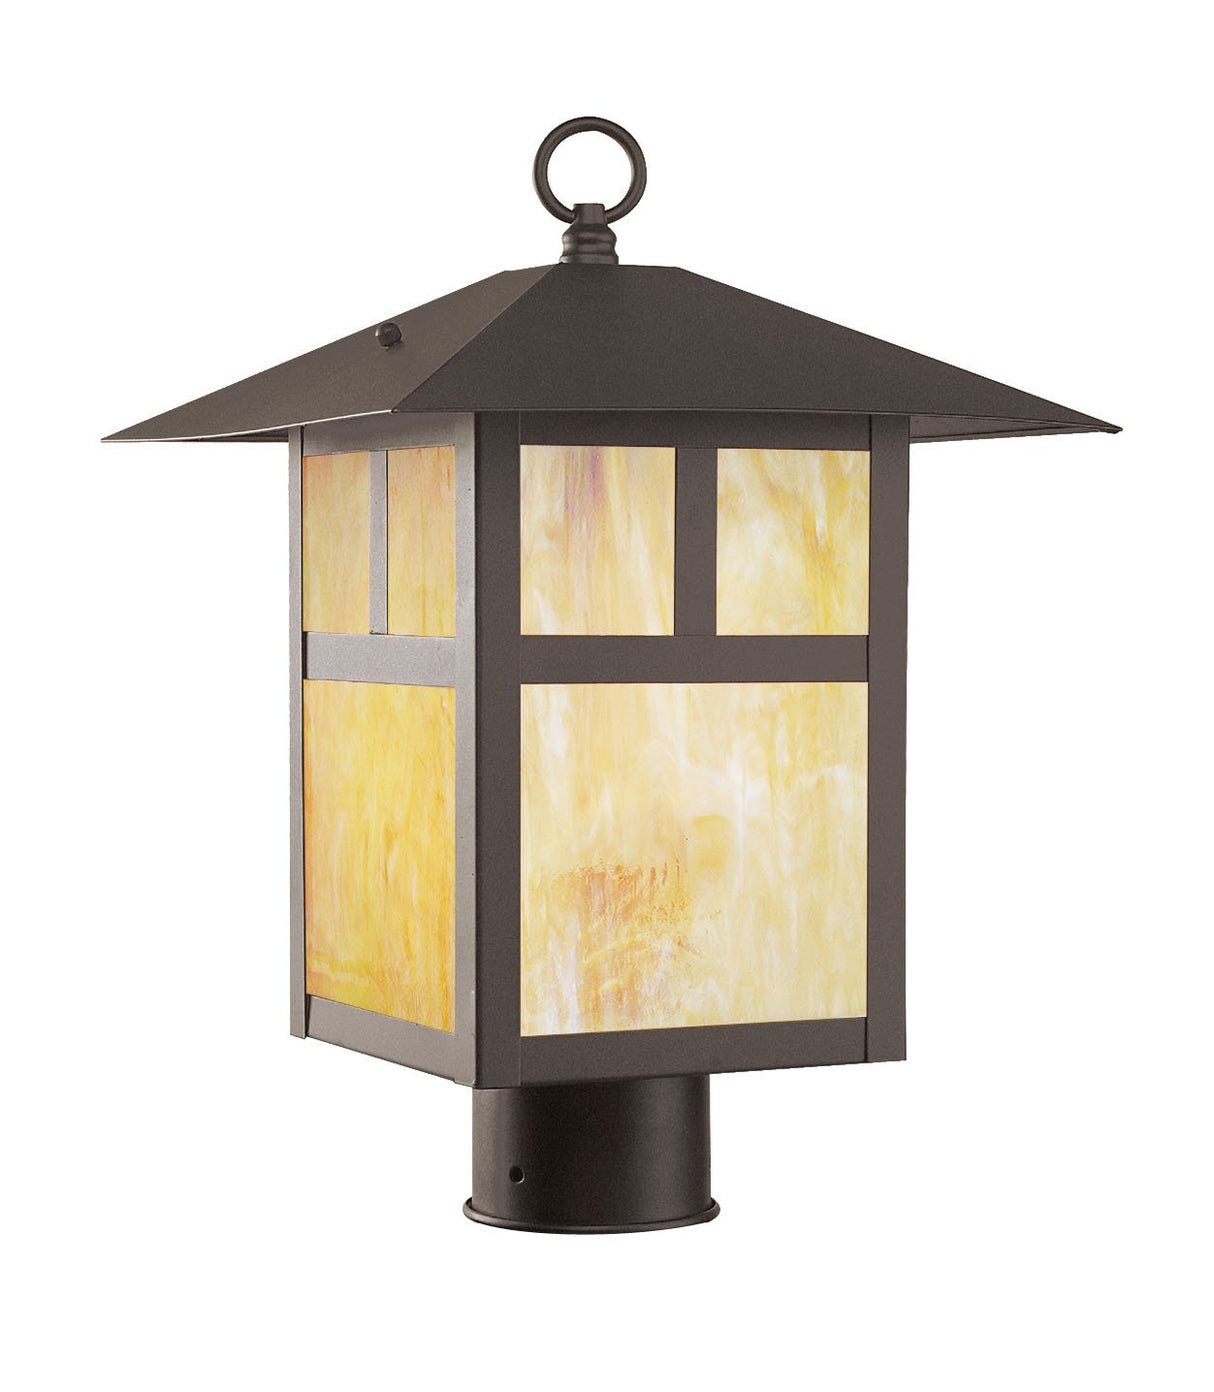 Livex Lighting 2140-07 Montclair Mission 1 Light Outdoor Bronze Finish Solid Brass Post Head with Iridescent Tiffany Glass, 18.00x13.00x13.00